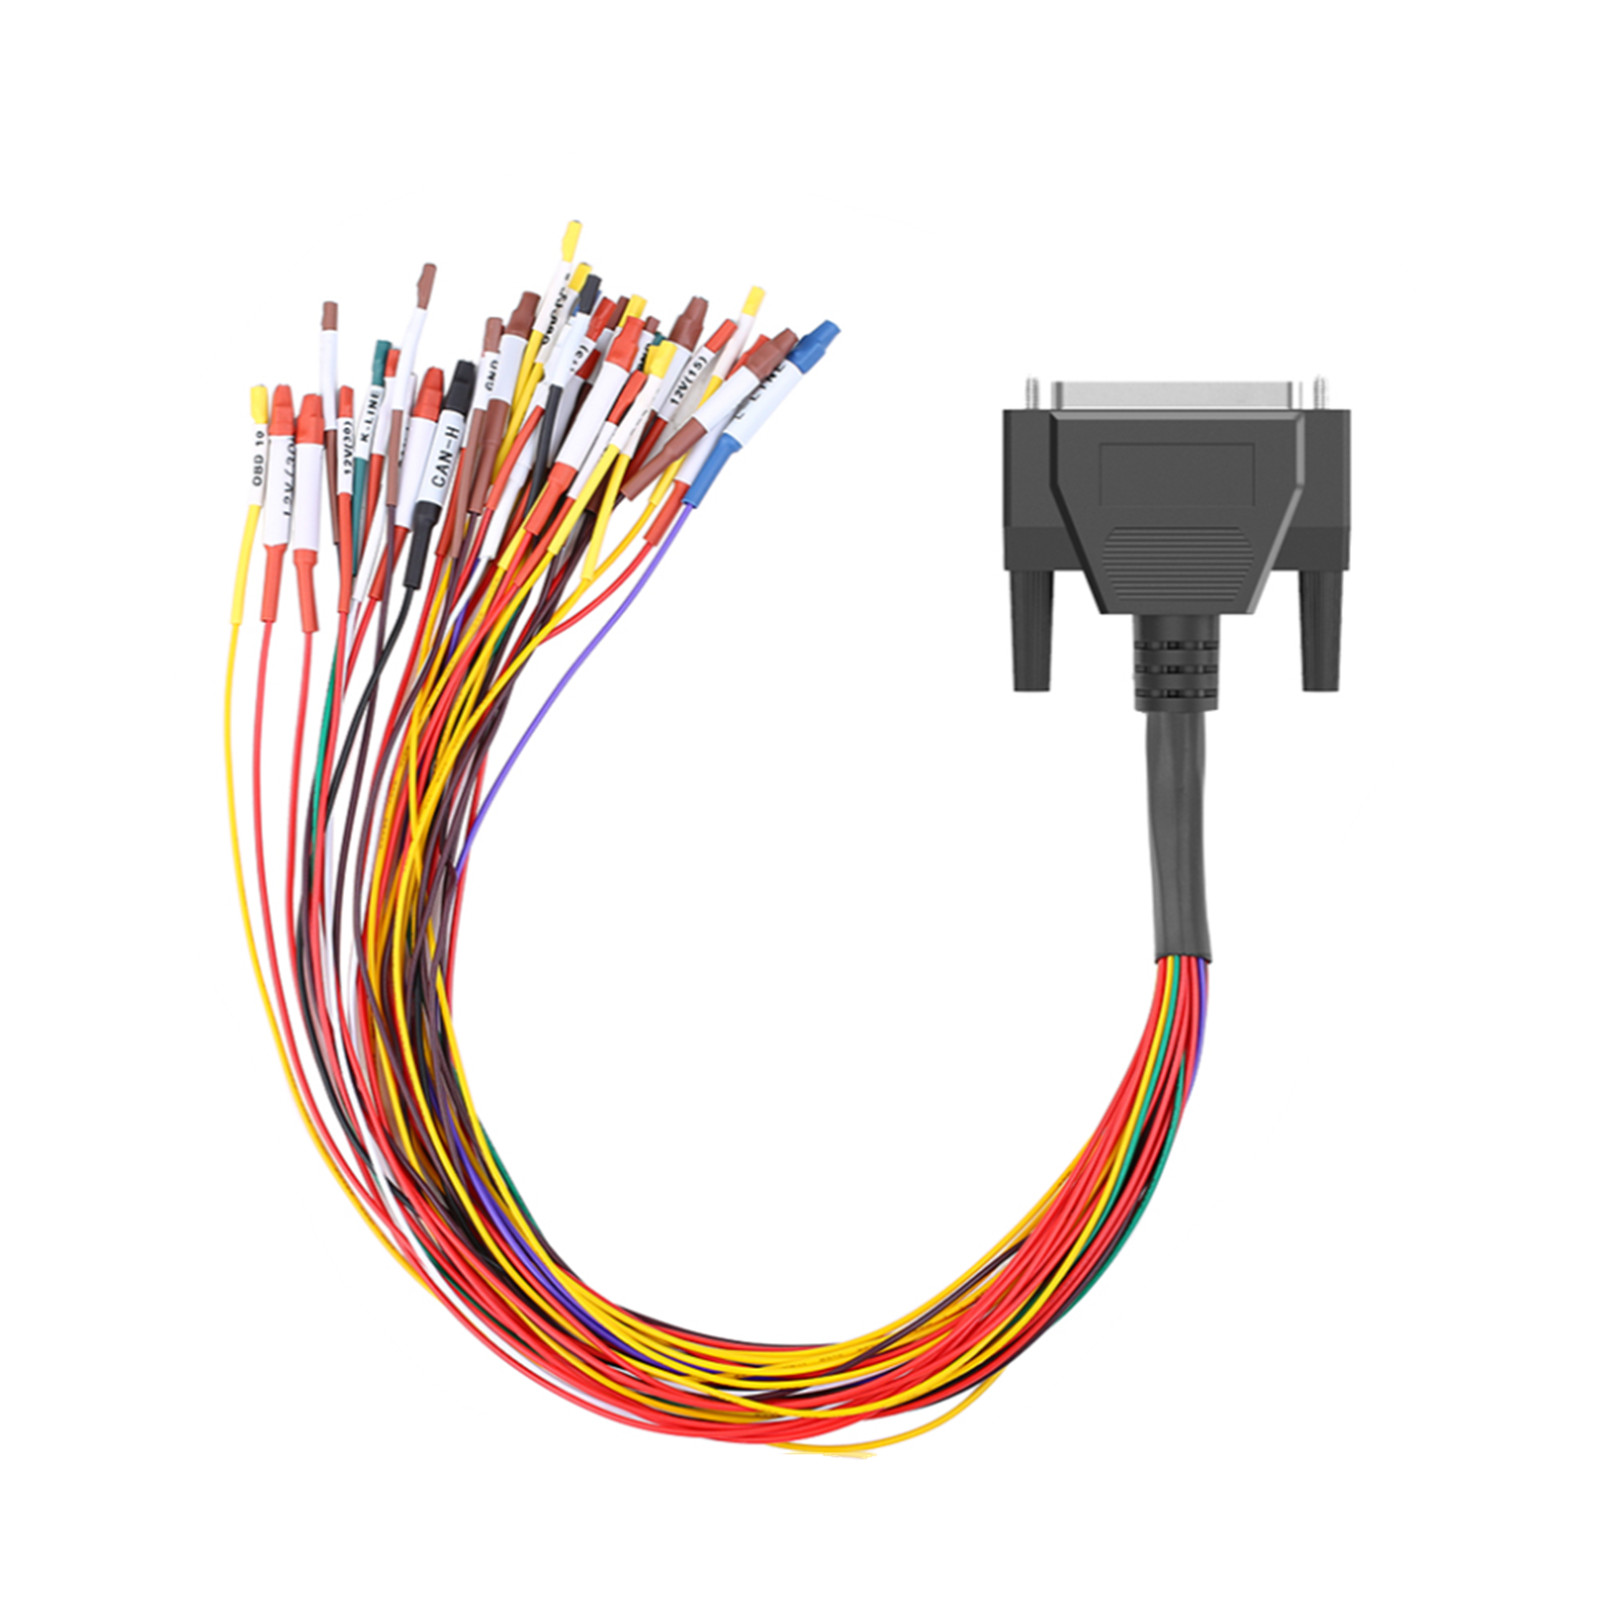 Godiag Colorful Jumper Cable DB25 for GODIAG GT100 and All ECU Connection